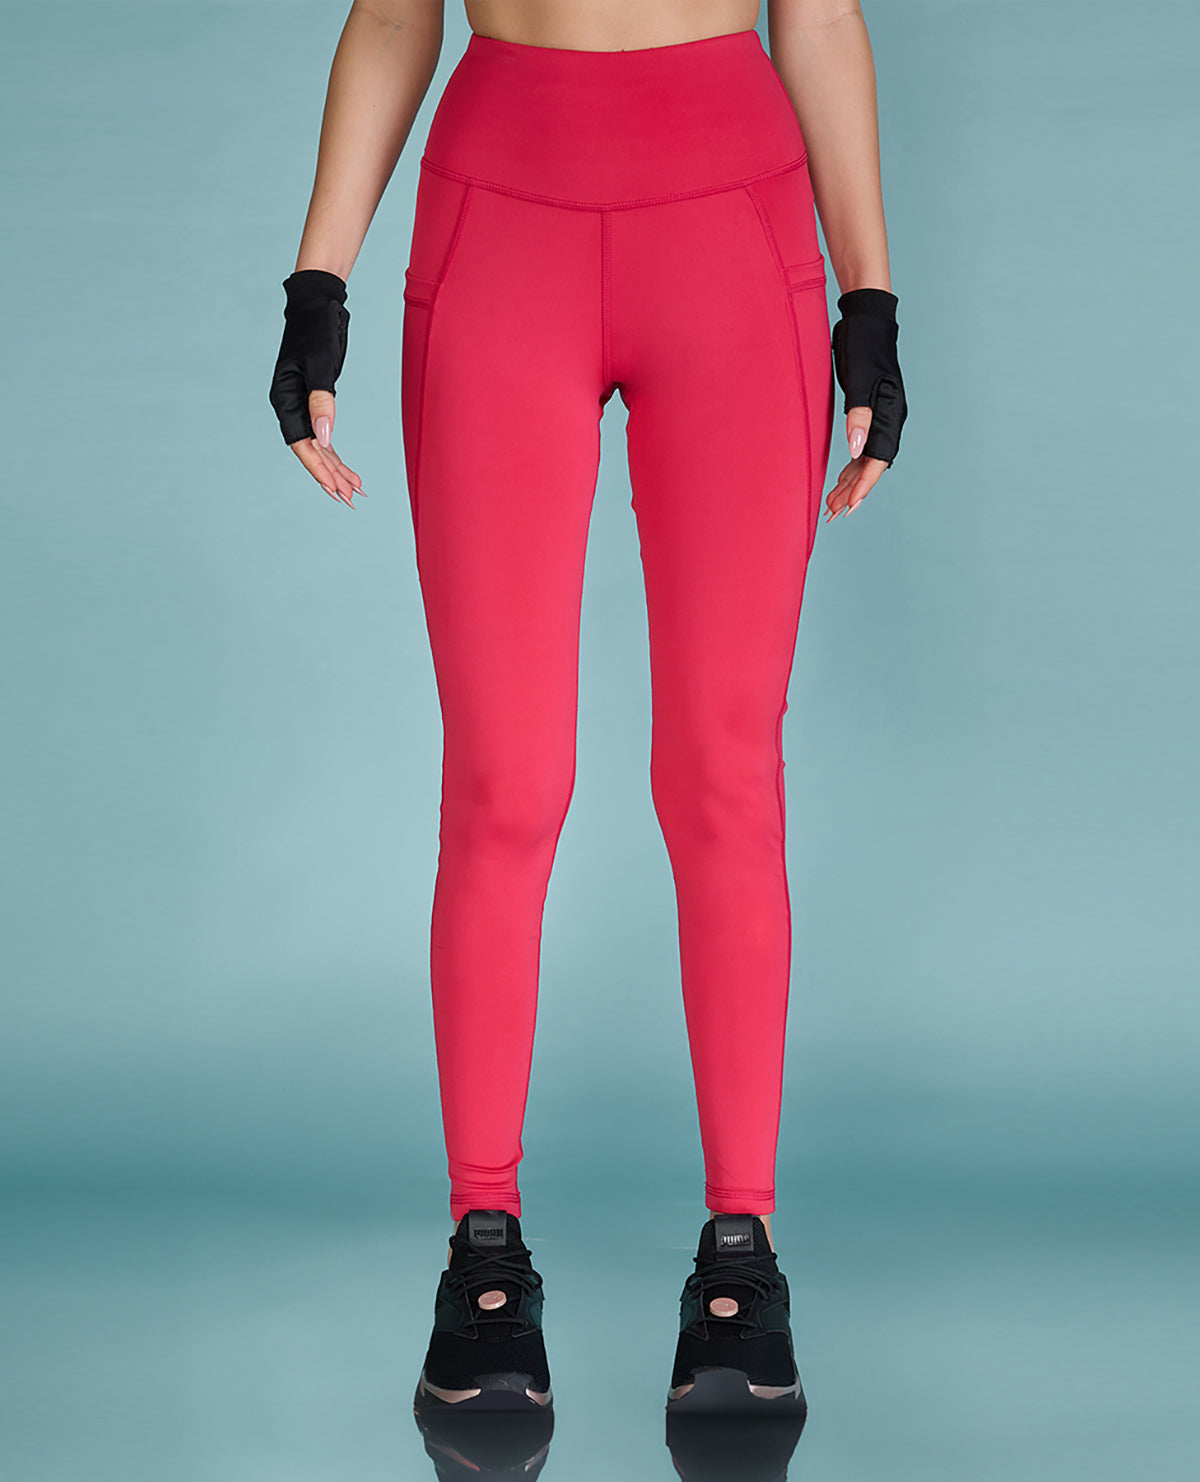 Buy Kica High Waisted Essential Leggings With Pockets And Perfect